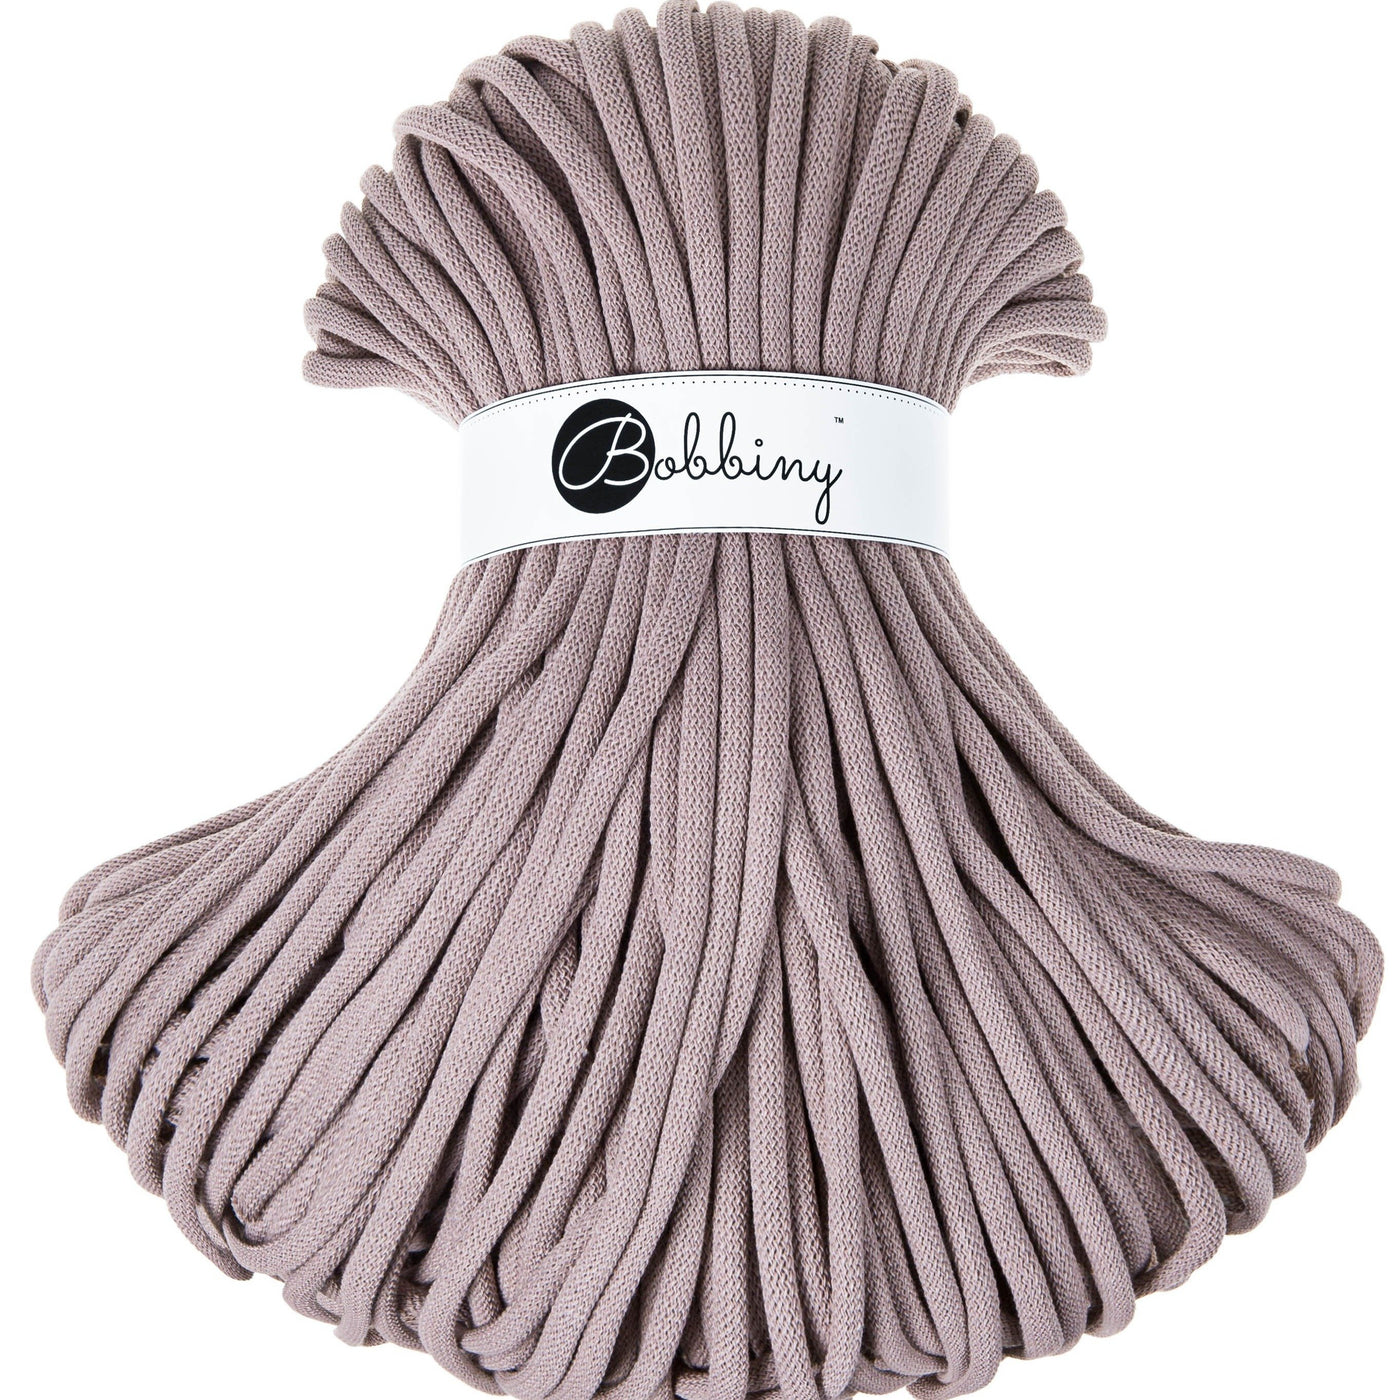 Where can I find Bobbiny Braided Cords Bobbiny Jumbo 9mm - 100m Pearl? These gorgeous Bobbiny Ropes are made in Poland from 100% recycled cottons and are non toxic and certified safe for children.  9mm Diameter  Length 100m  Recommended for use with 14-16mm crochet hooks or knitting needles.  Perfect for use with Macrame, Crochet or Knitting.